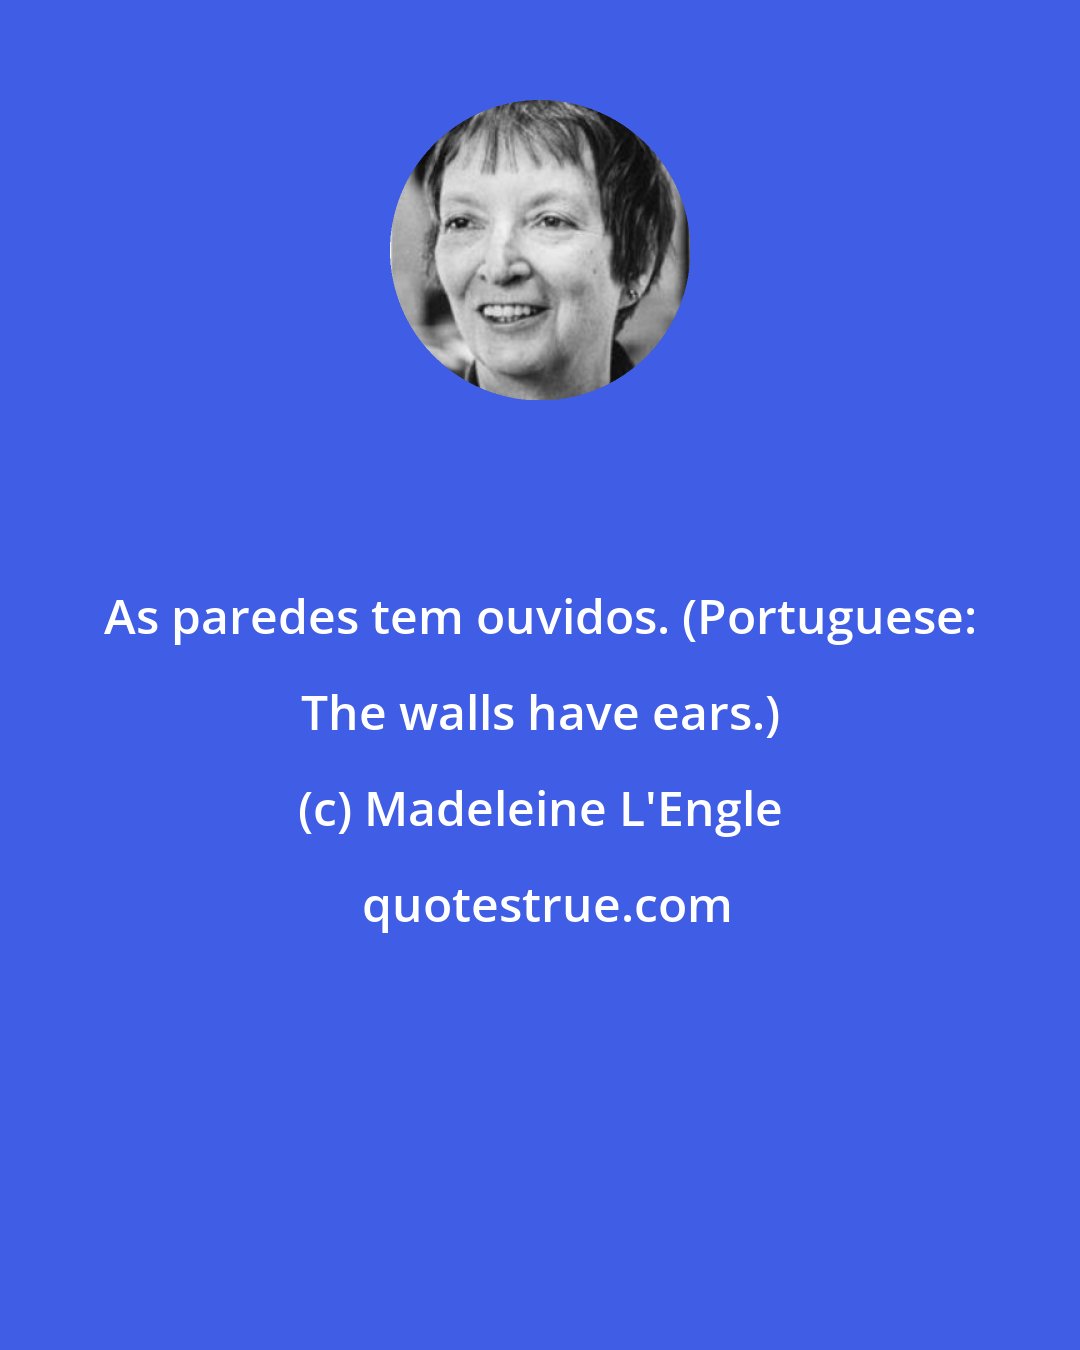 Madeleine L'Engle: As paredes tem ouvidos. (Portuguese: The walls have ears.)